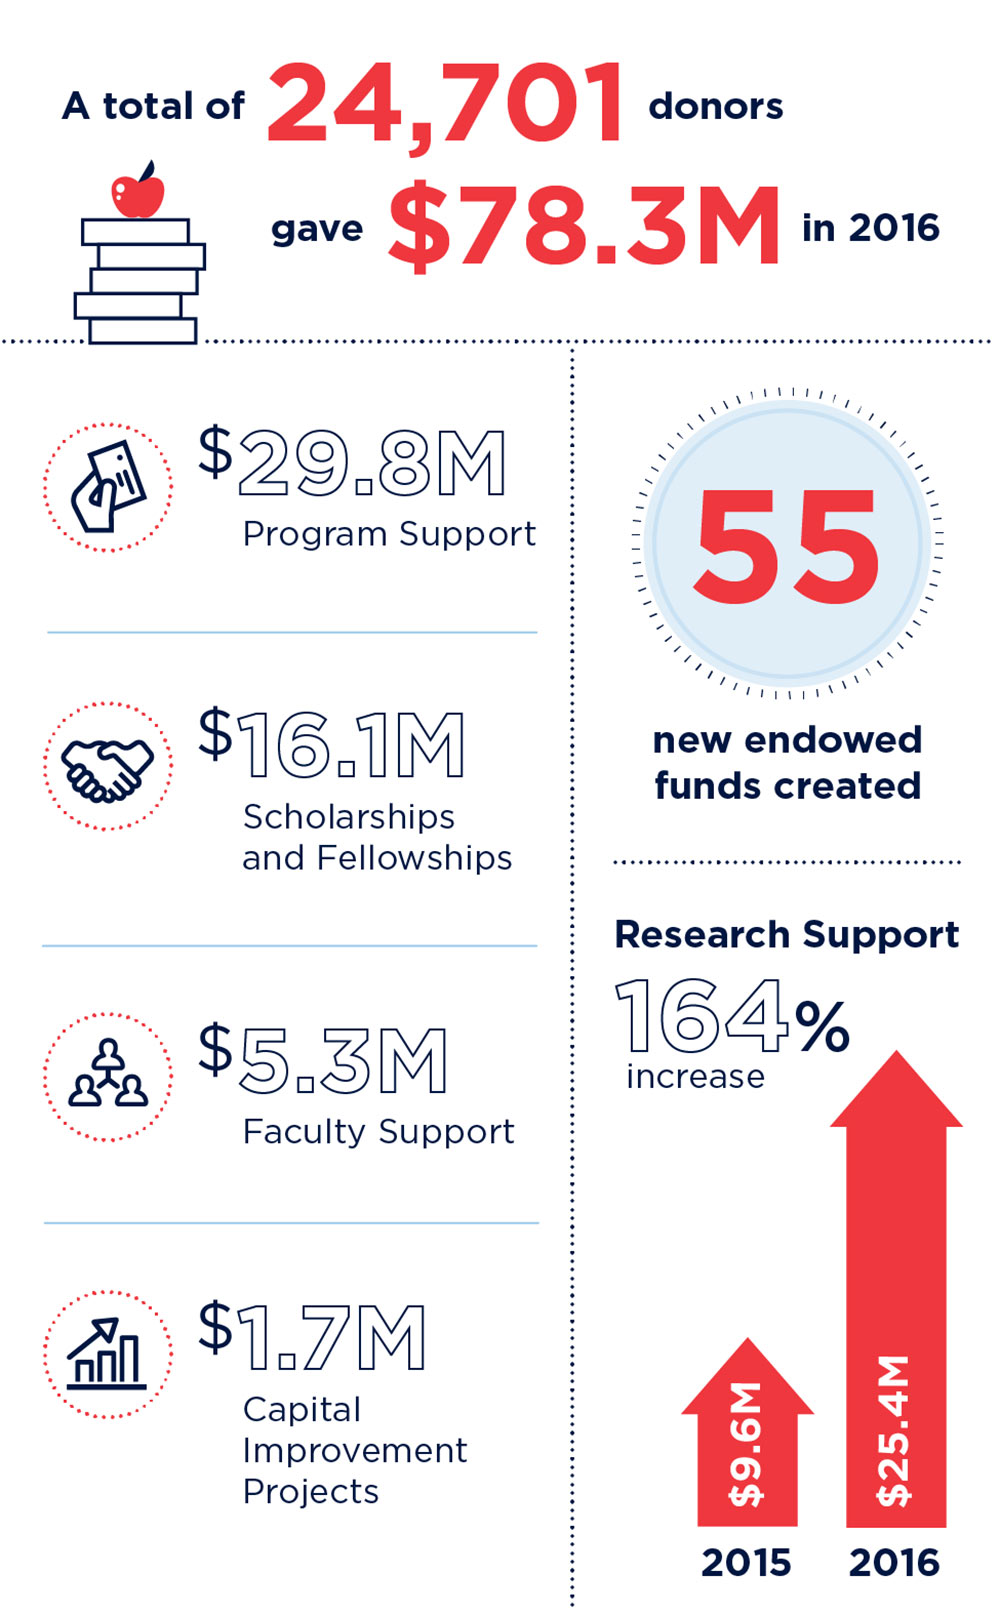 A total of 24,701 donors gave $78.3 million in 2016. 29.8 million dollars to Program Support. 161 million dollars to Scholarships and Fellowships. 5.3 million dollars to Faculty Support. 1.7 million dollars to Capital Improvement Projects. 55 new endowed funds created. Research Support increased 164% - from 9.6 million dollars in 2015 to 25.4 million dollars in 2016.